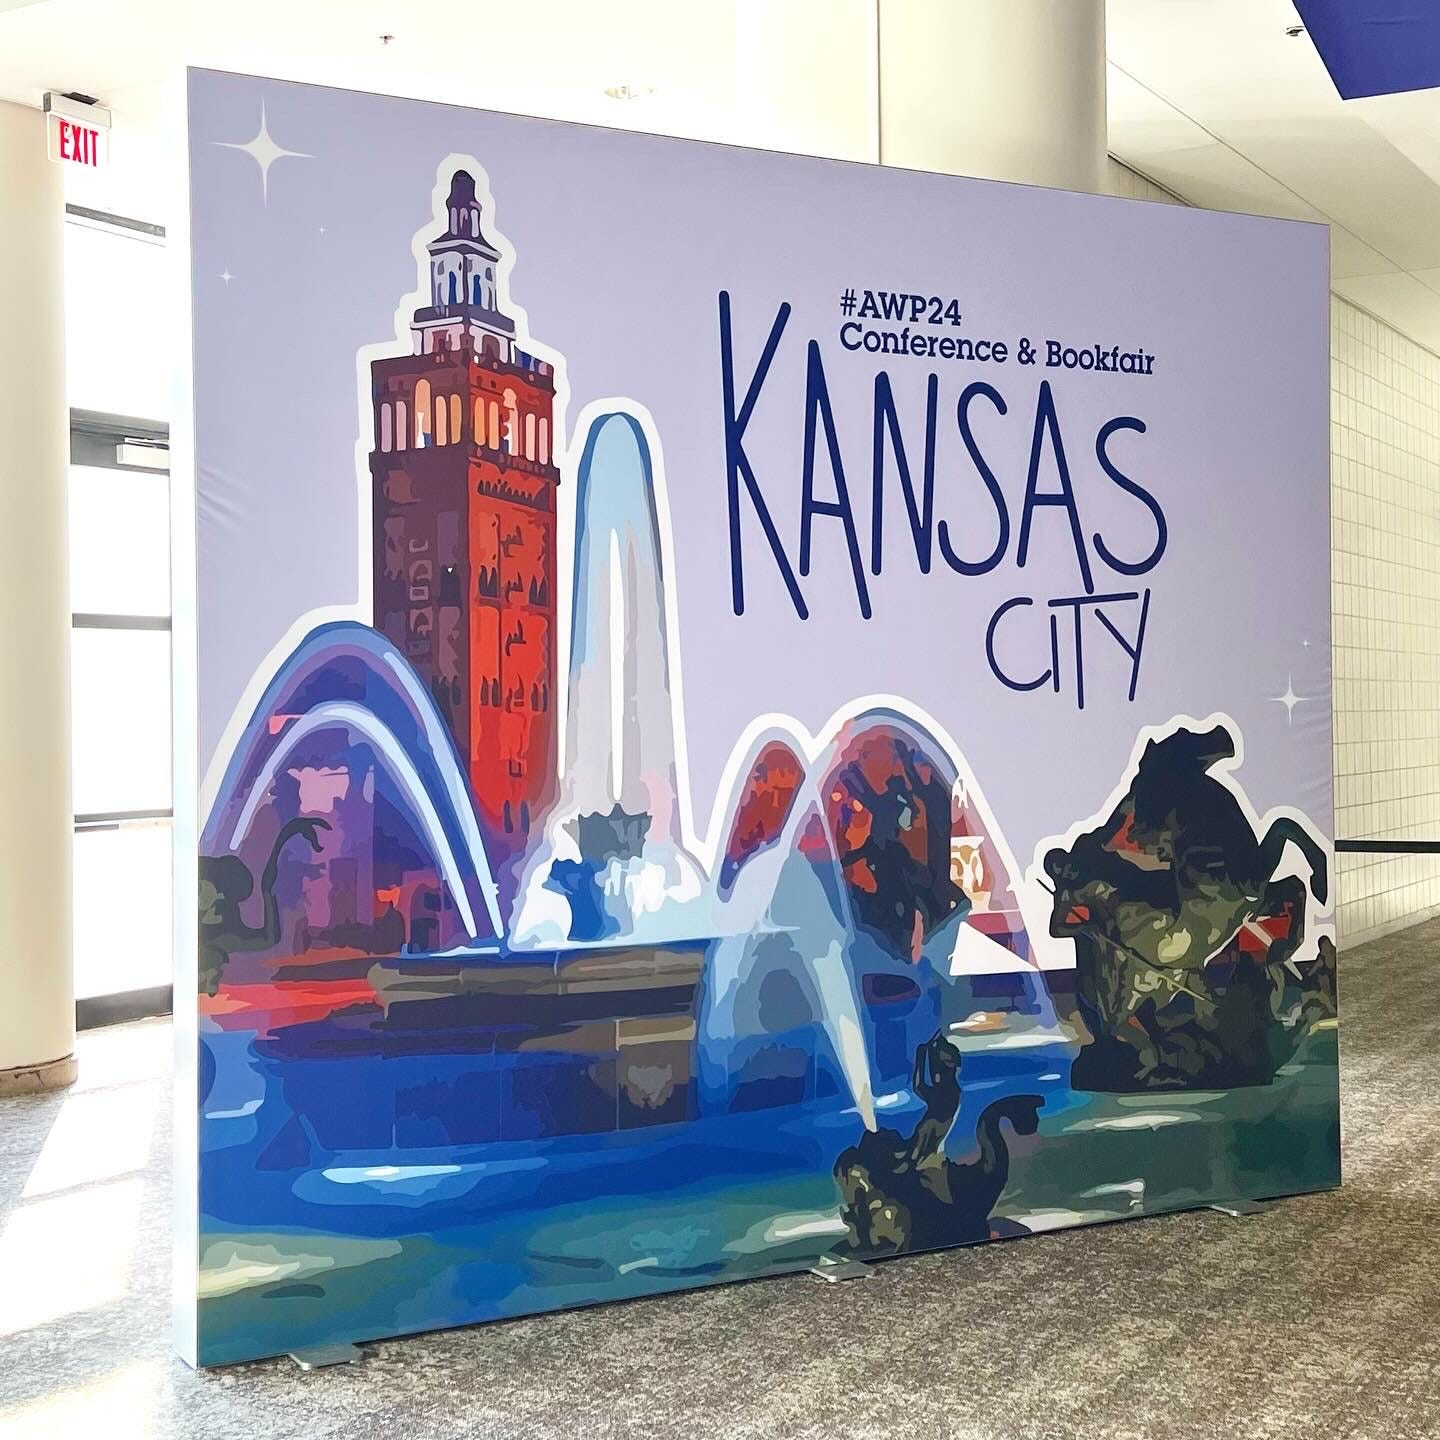 A big banner/sign advertising the AWP conference in Kansas City